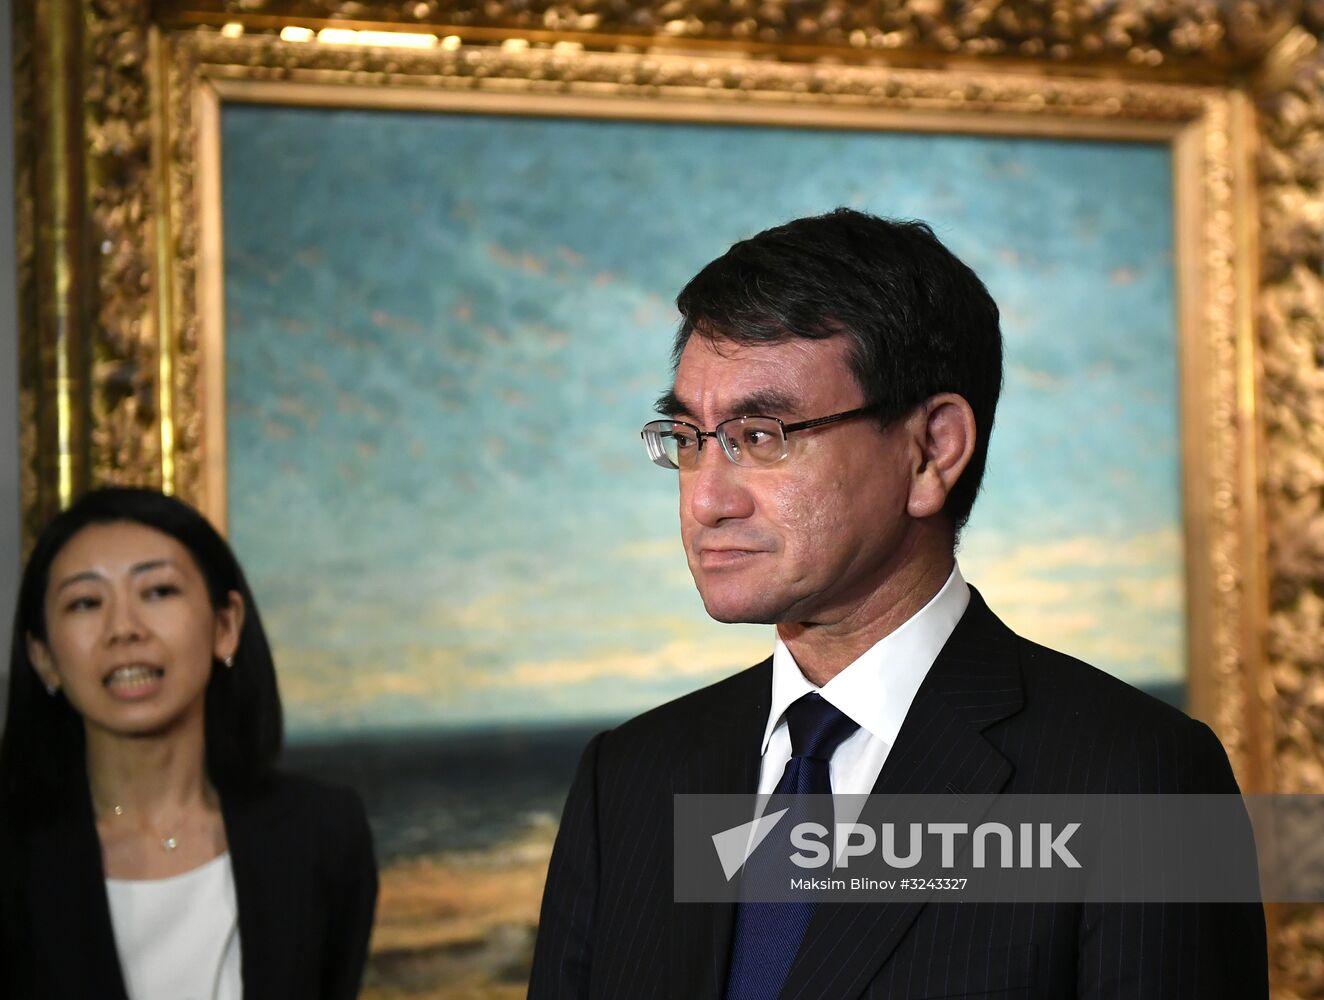 Japanese Minister of Foreign Affairs Taro Kono visits Pushkin State Museum of Fine Arts